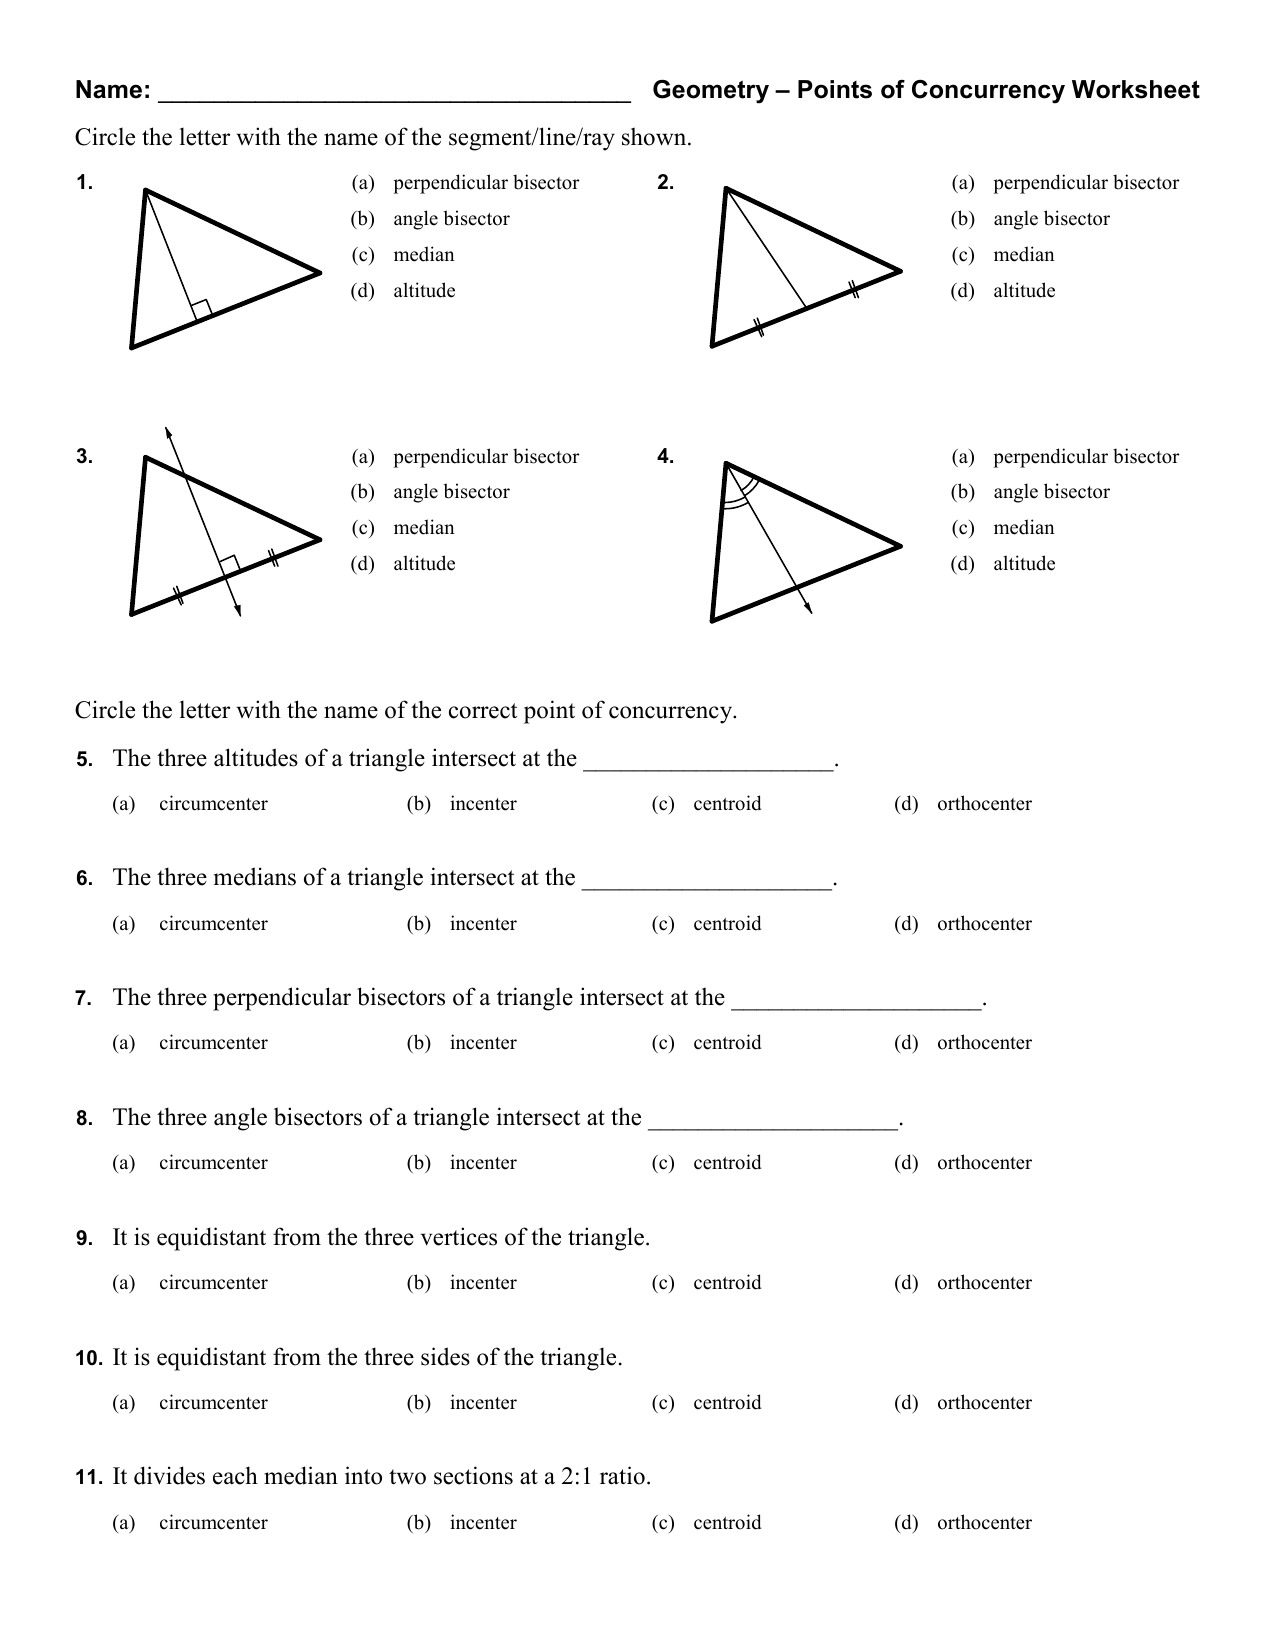 Mfas C Medians And Centroids Worksheet Answers Simple Angles Db excel